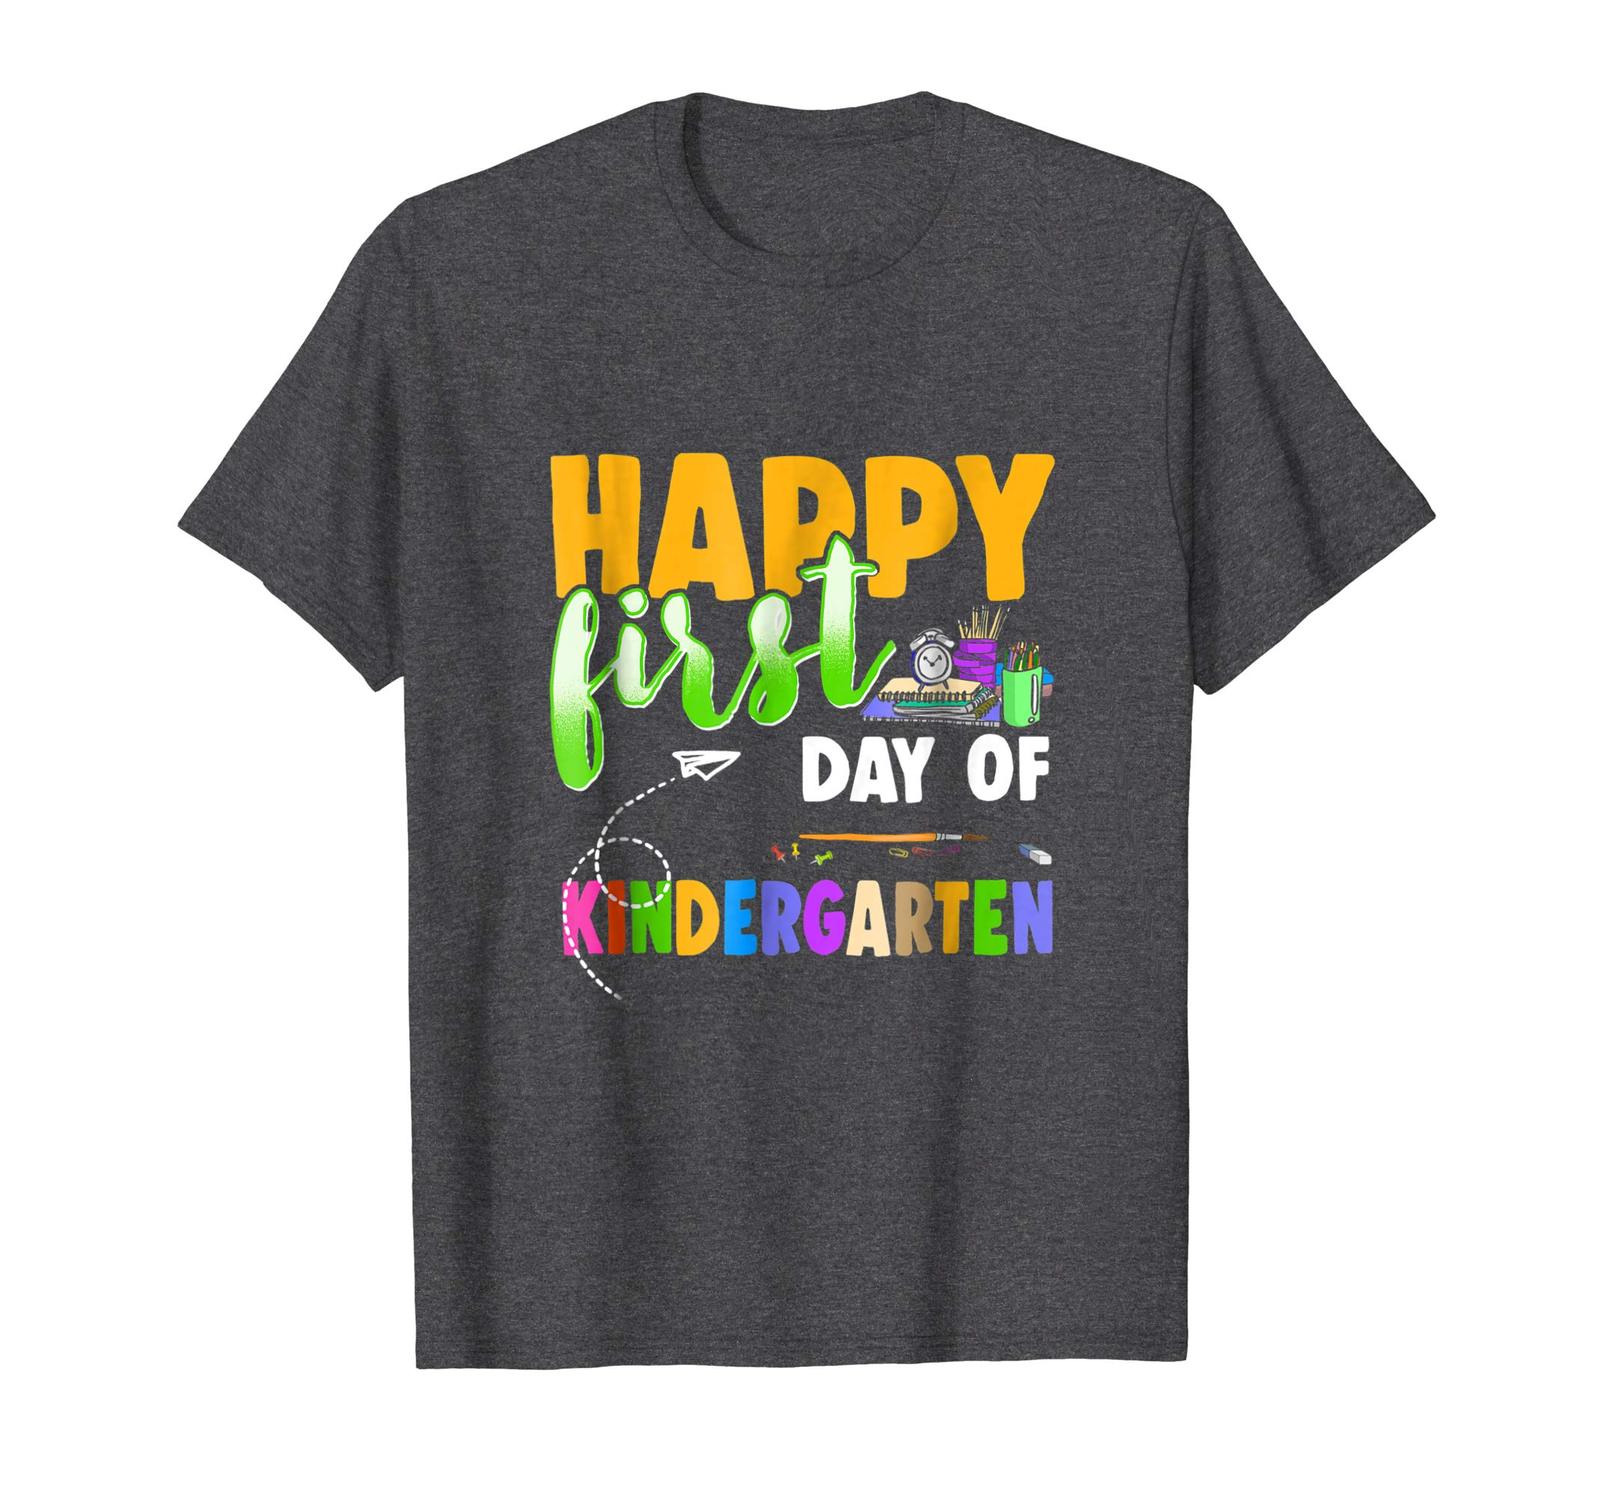 Large size shirts - Kindergarten Shirt Funny Happy First Day Of ...